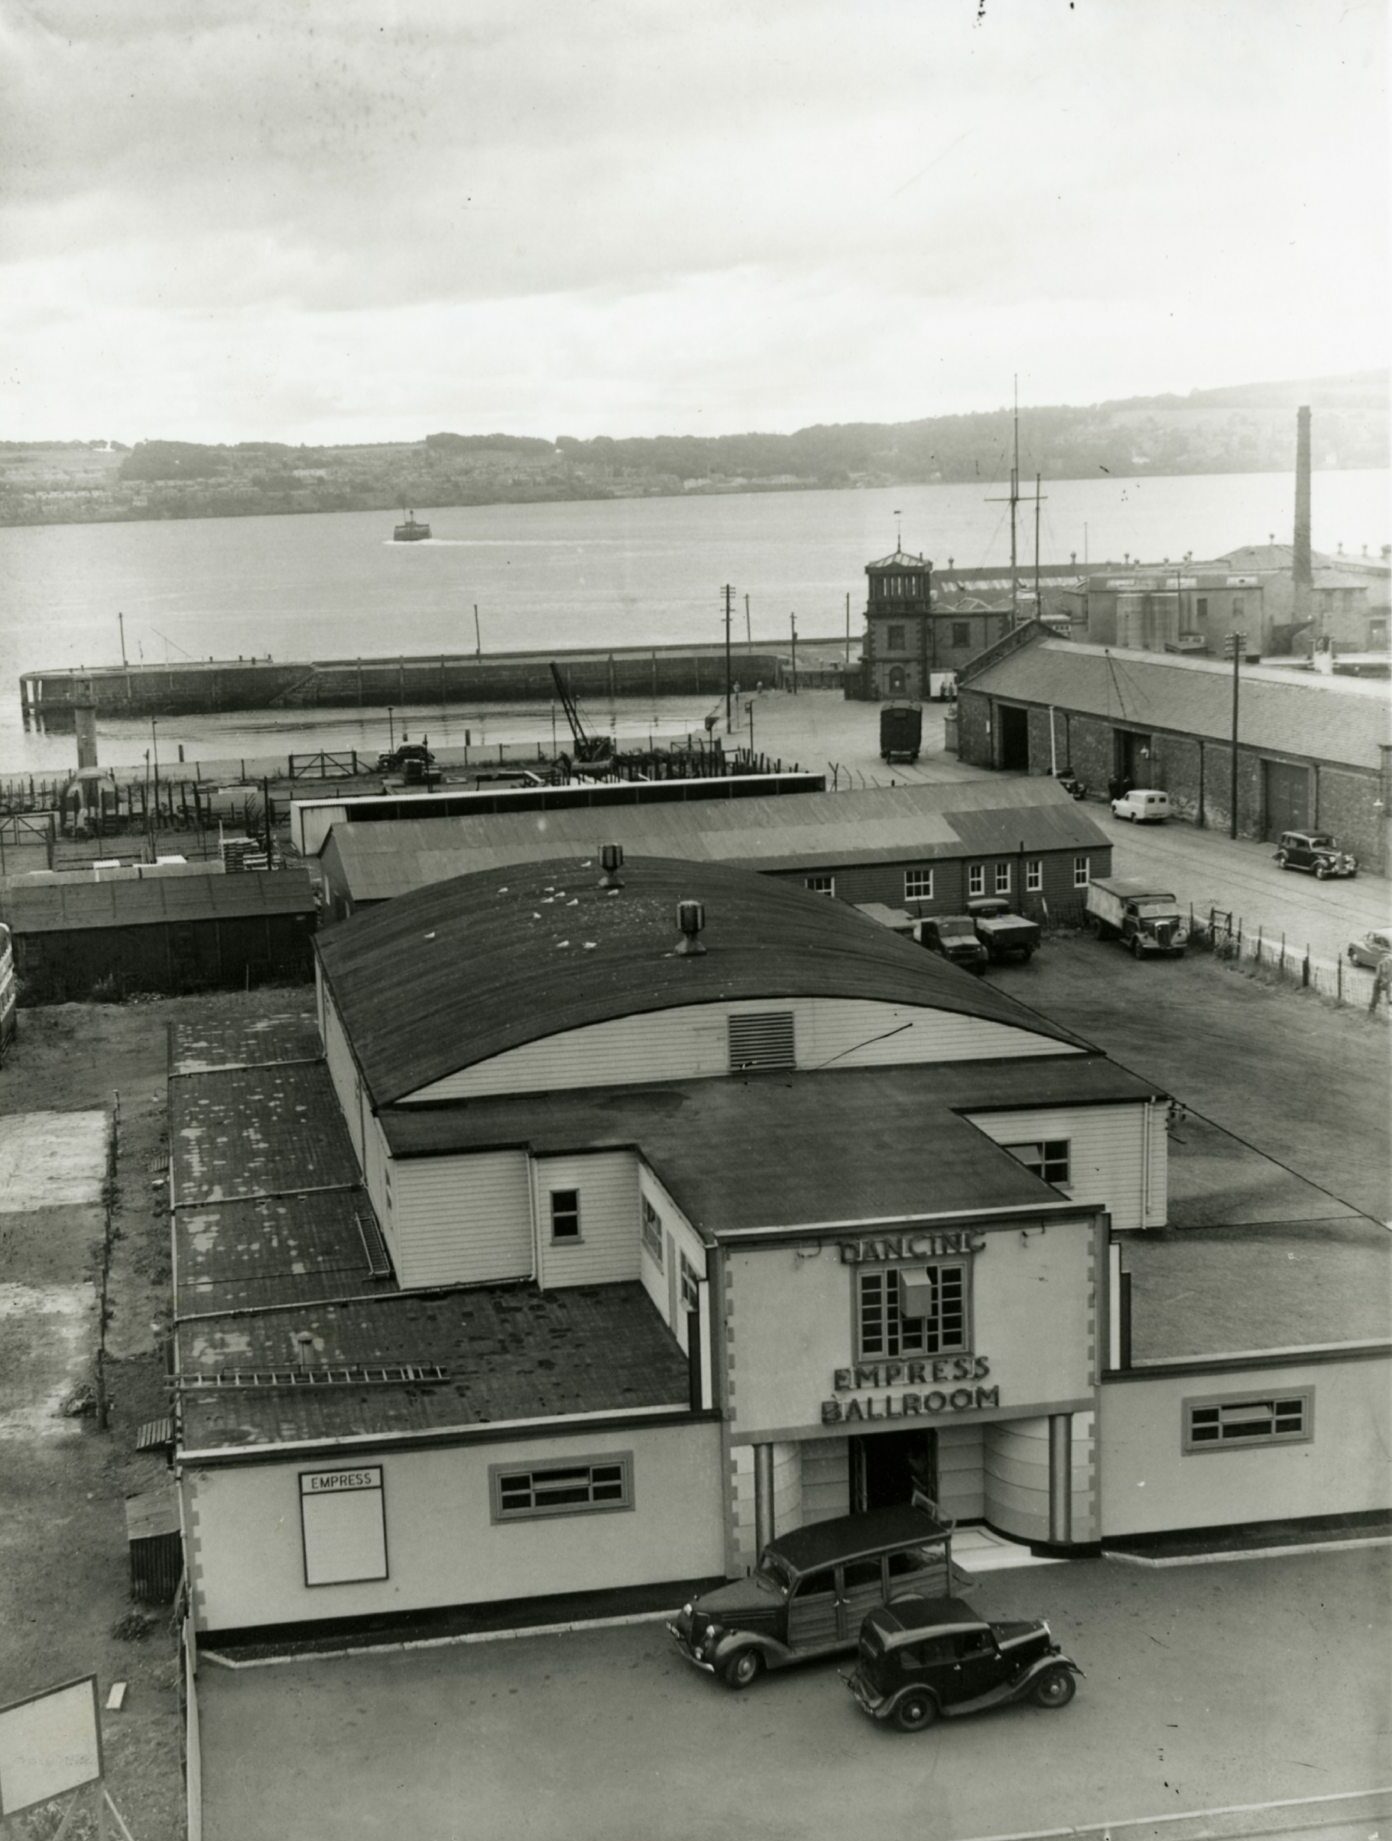 An elevated shot of The Empress Ballroom with the Tay in the background.